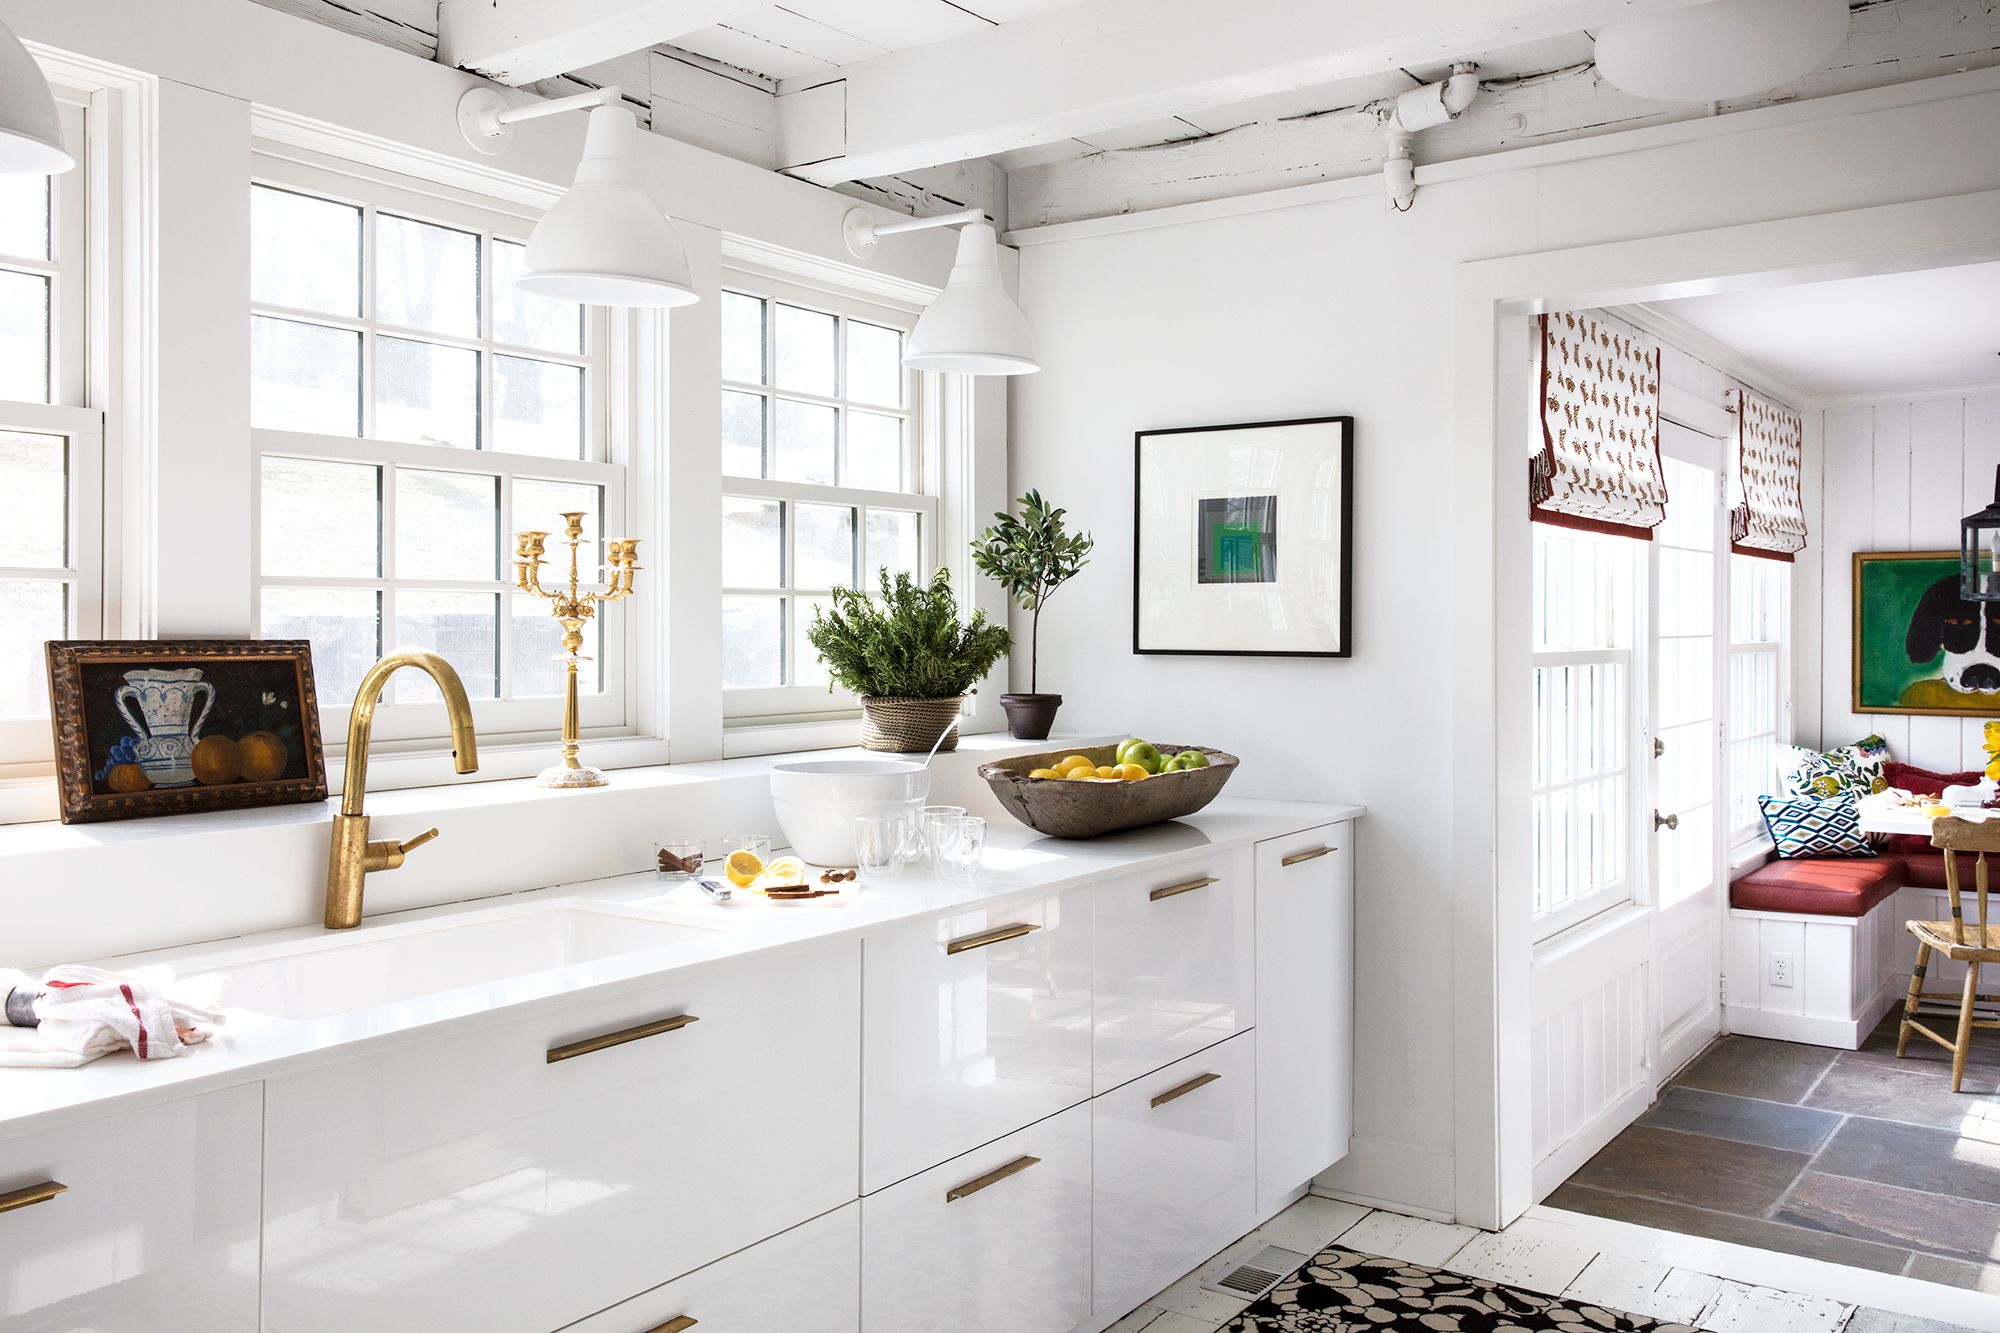 How to Decorate a Bathroom Sink | Pottery Barn